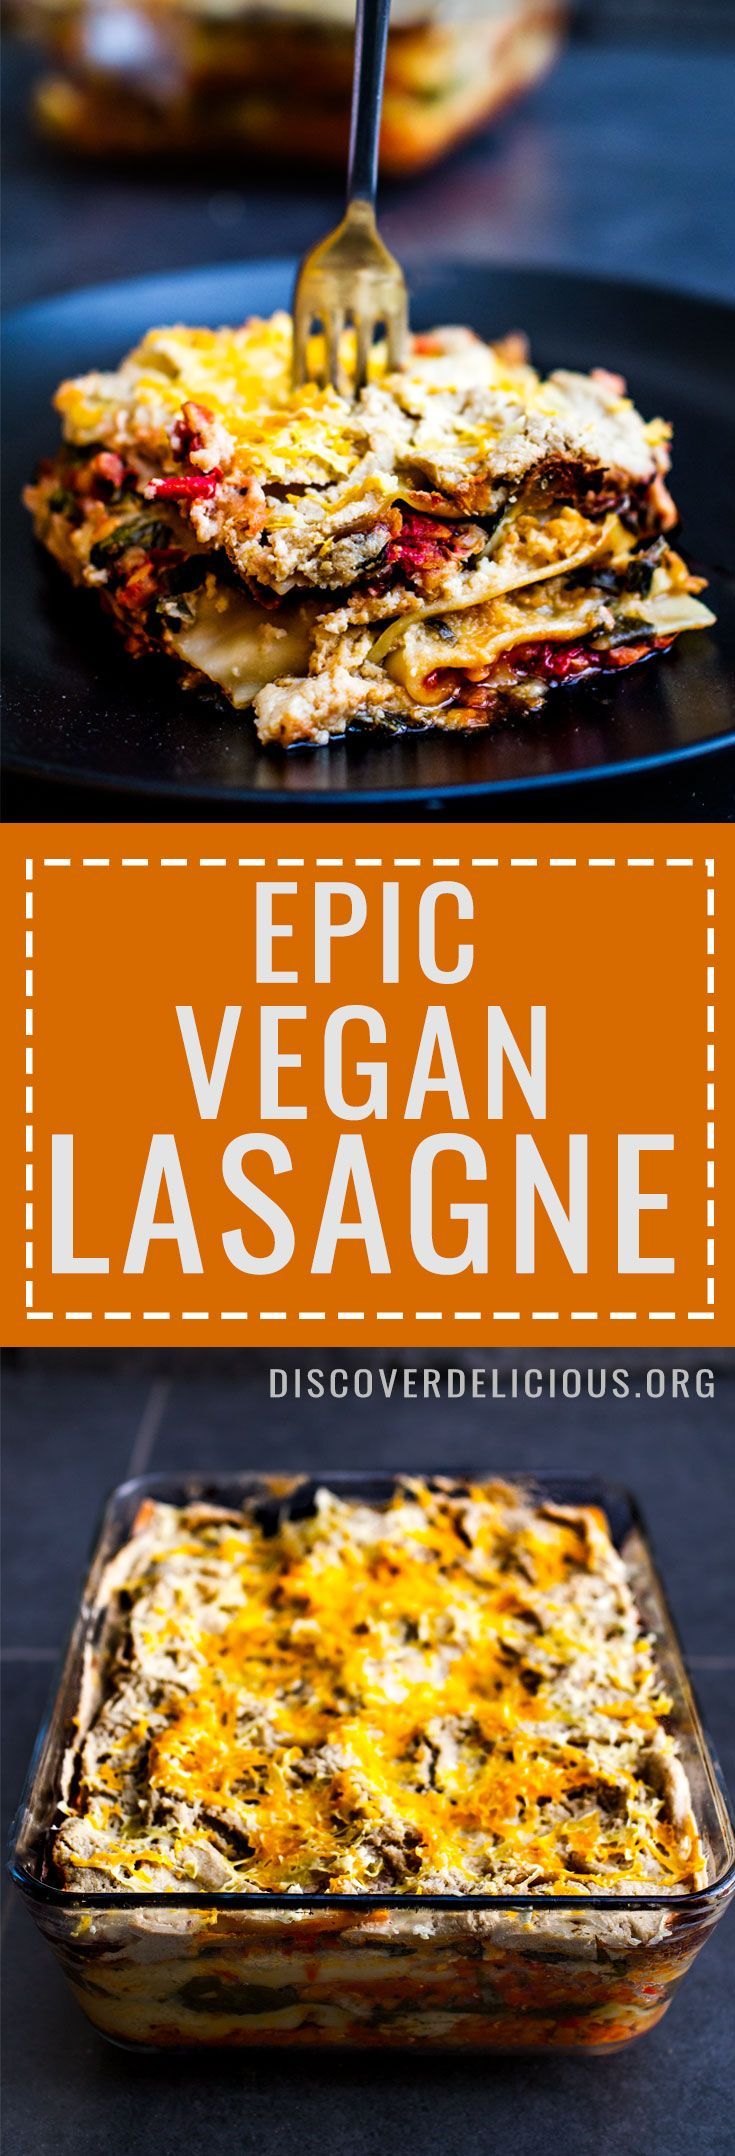 Vegan Lasagne Recipe - perfect for a large family meal or meal prep for the week! So delicious and satisfying but remains light! | Discover Delicious | www.discoverdelicious.org -   24 vegan recipes dinner
 ideas